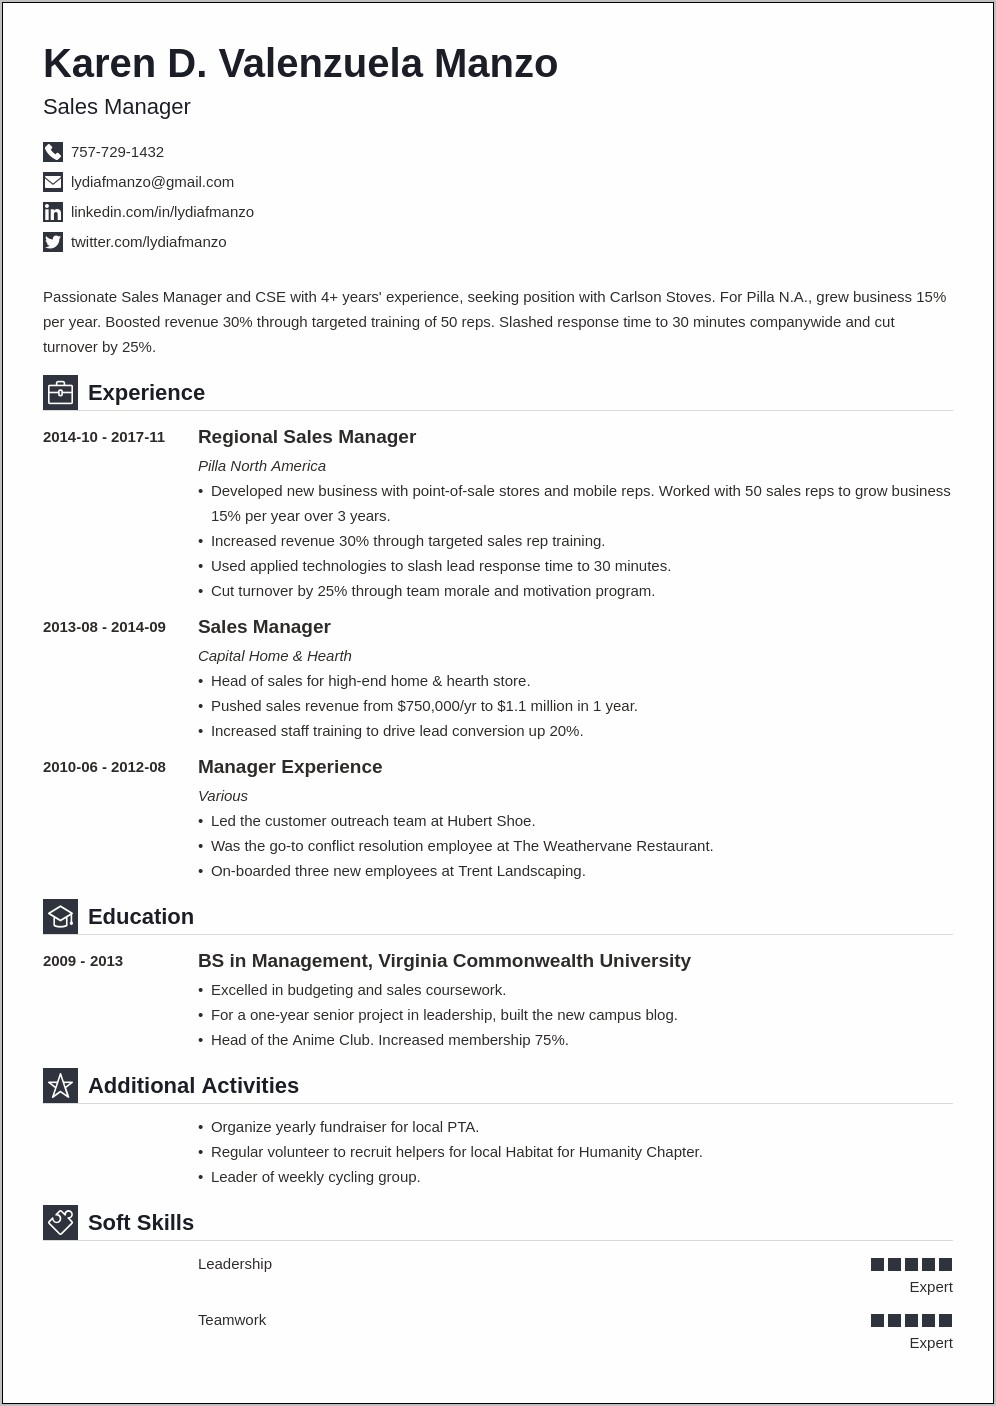 Manager Skills And Abilities Summary Resume